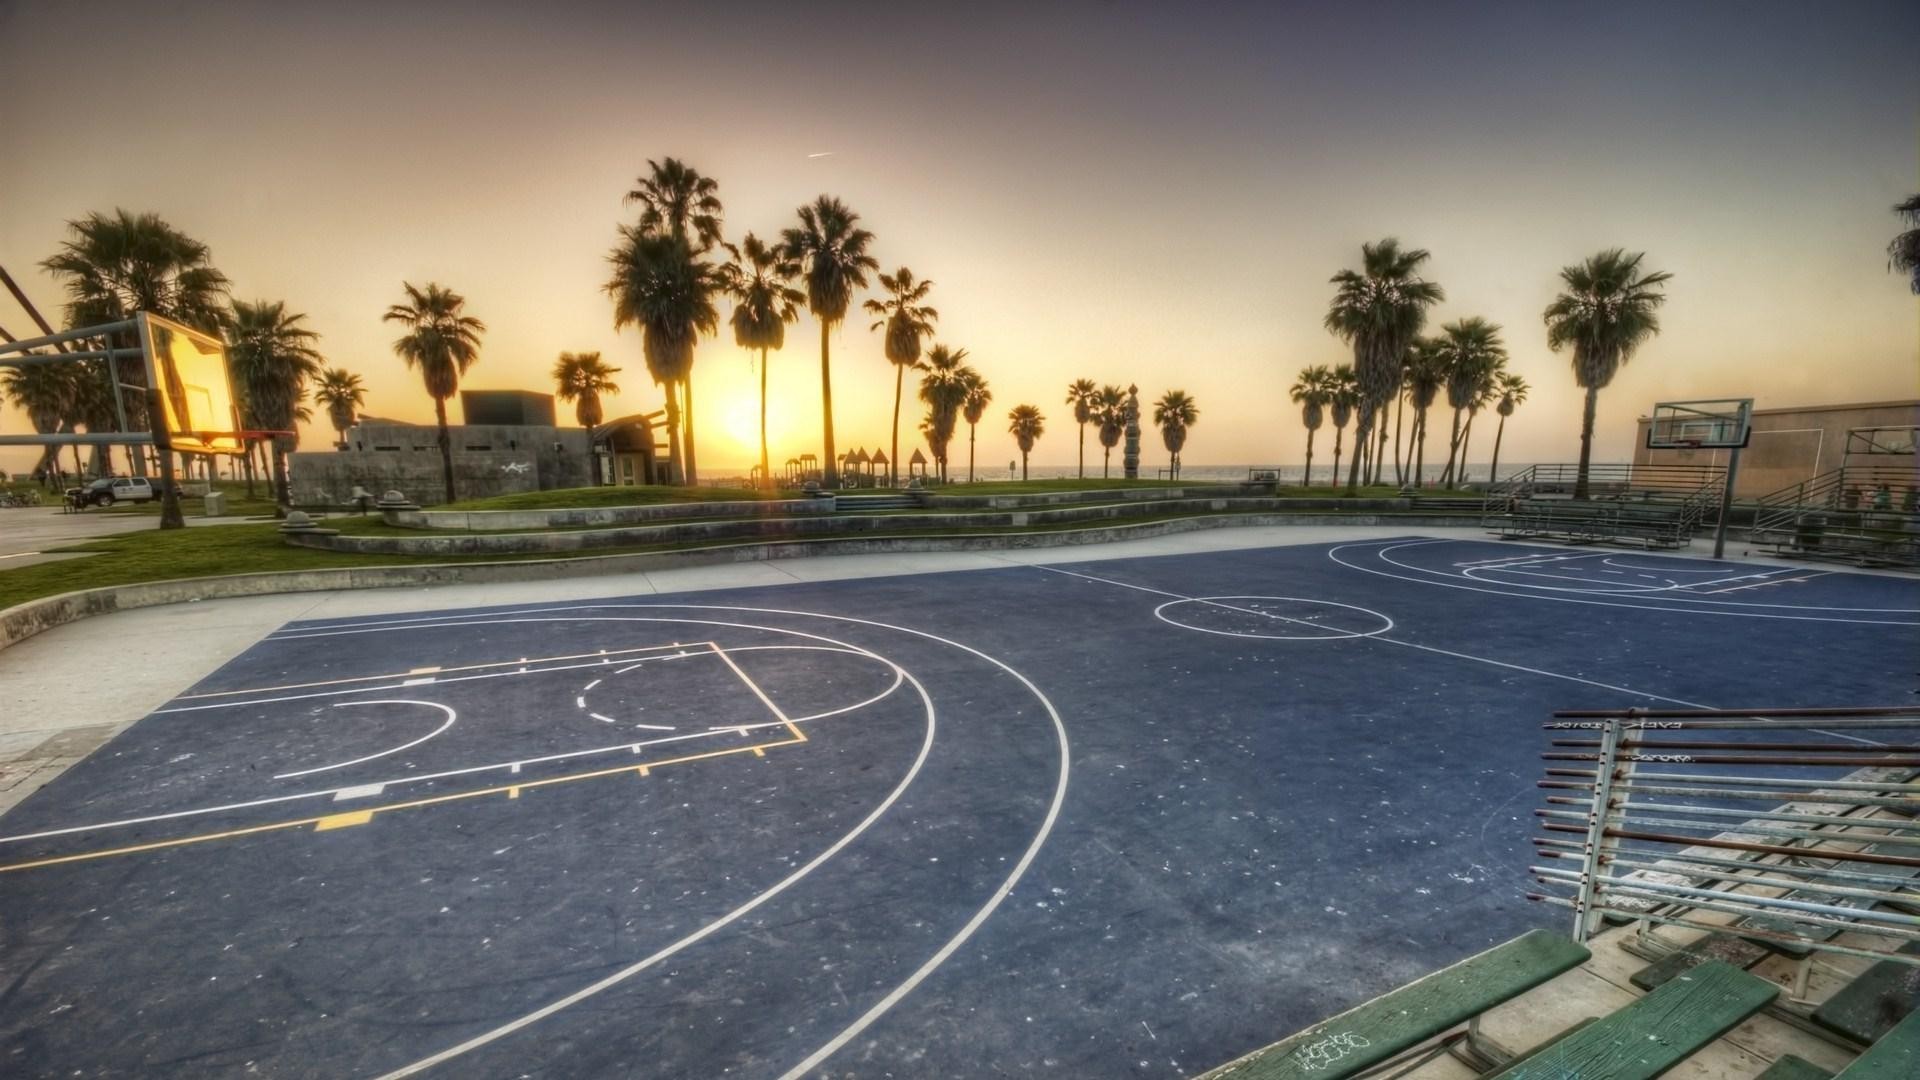 Basketball Court Wallpaper Wide Background For Puters